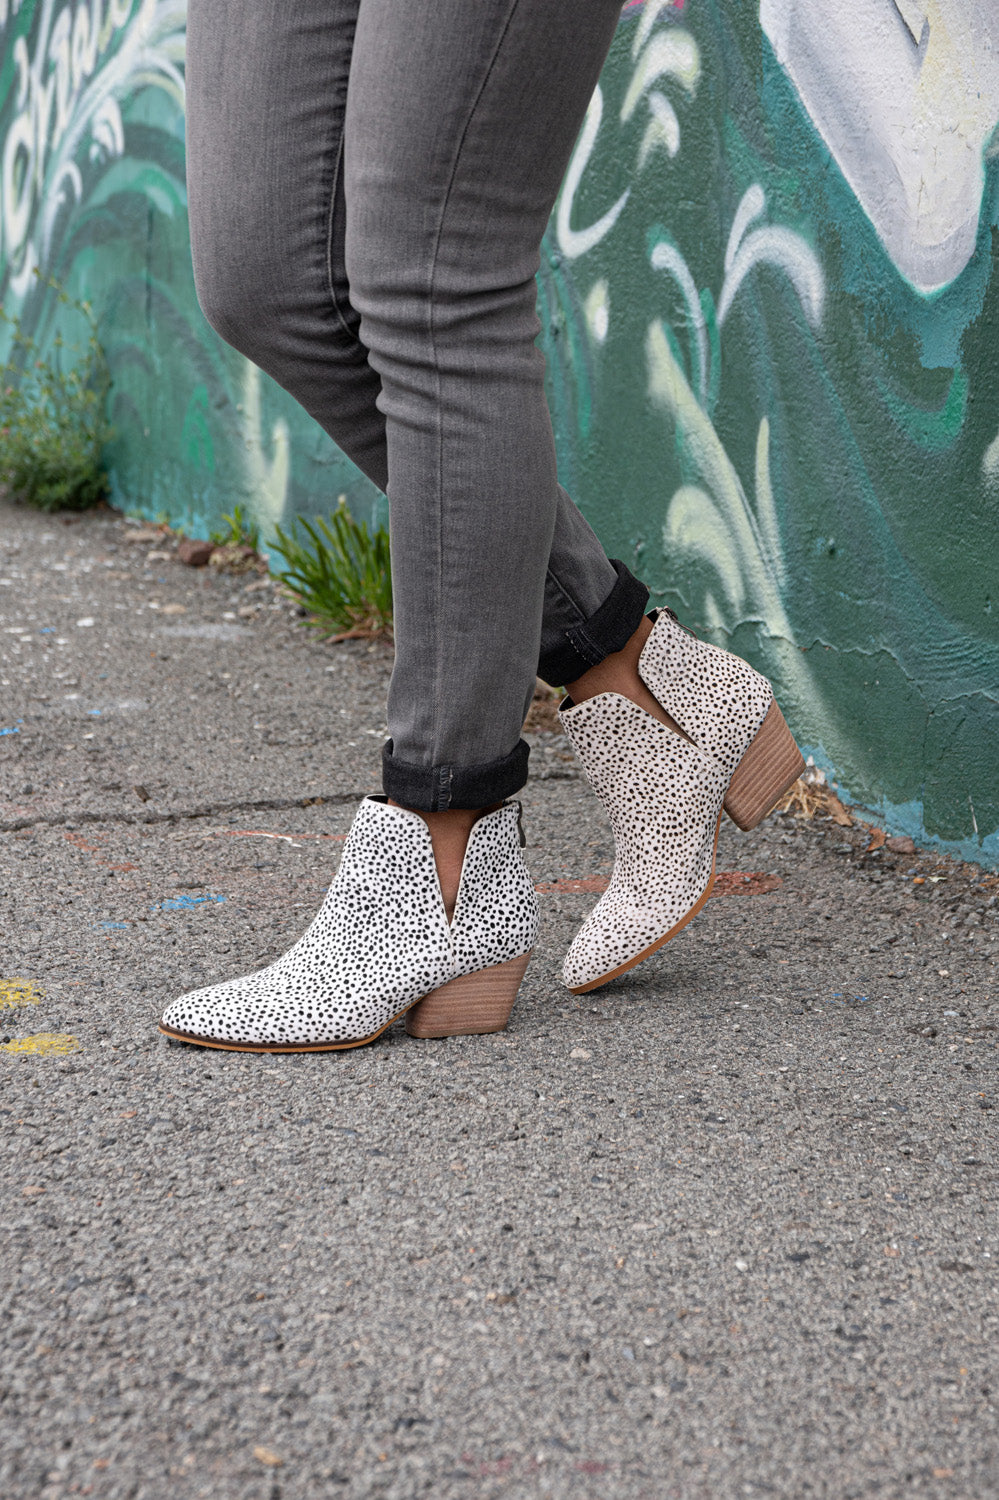 Dotty’s speckled bootie